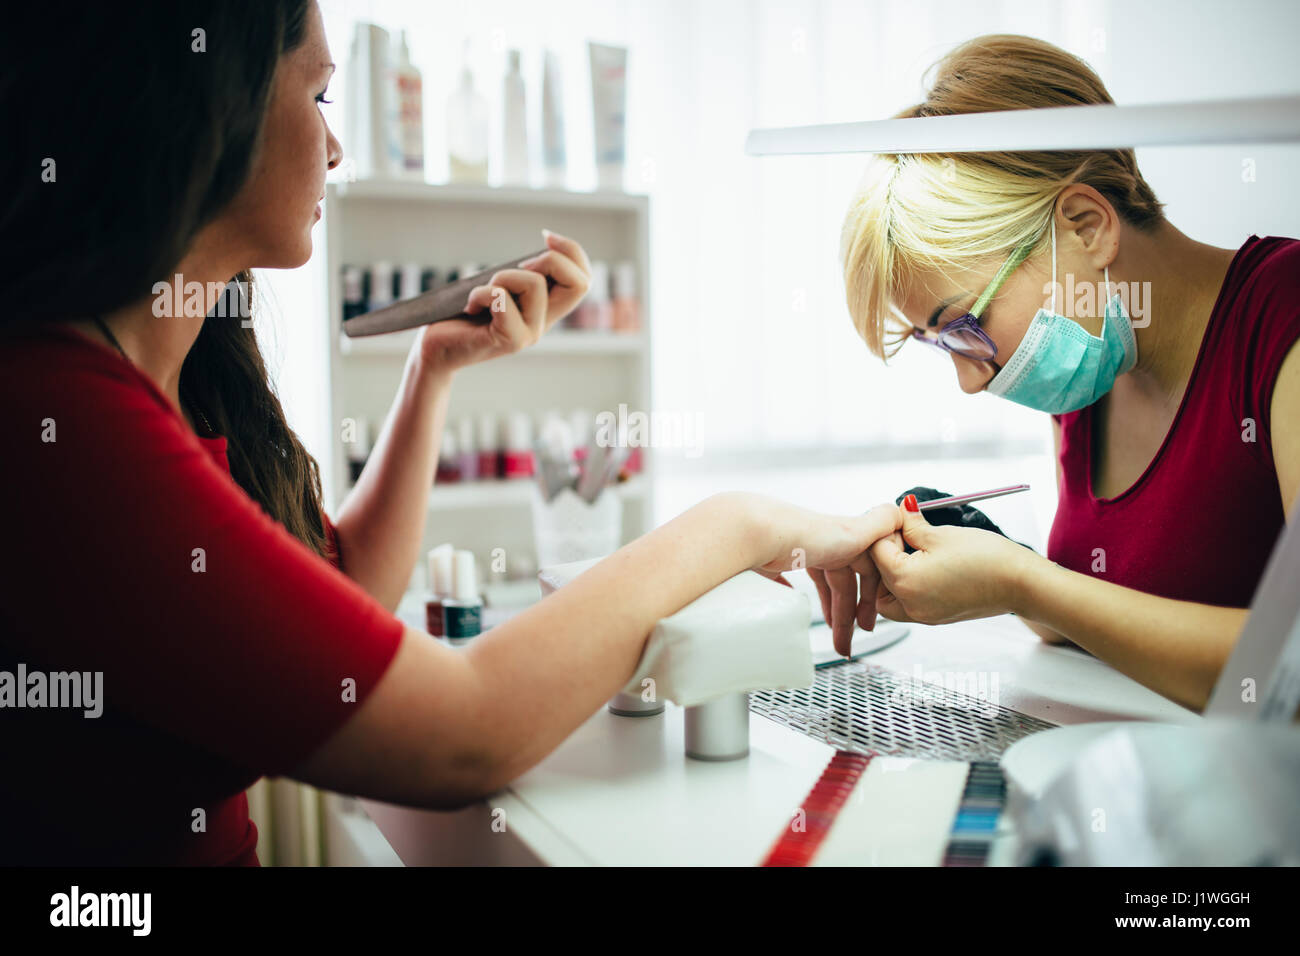 Woman at beauty salon receiving manicure and nail treatment Stock Photo